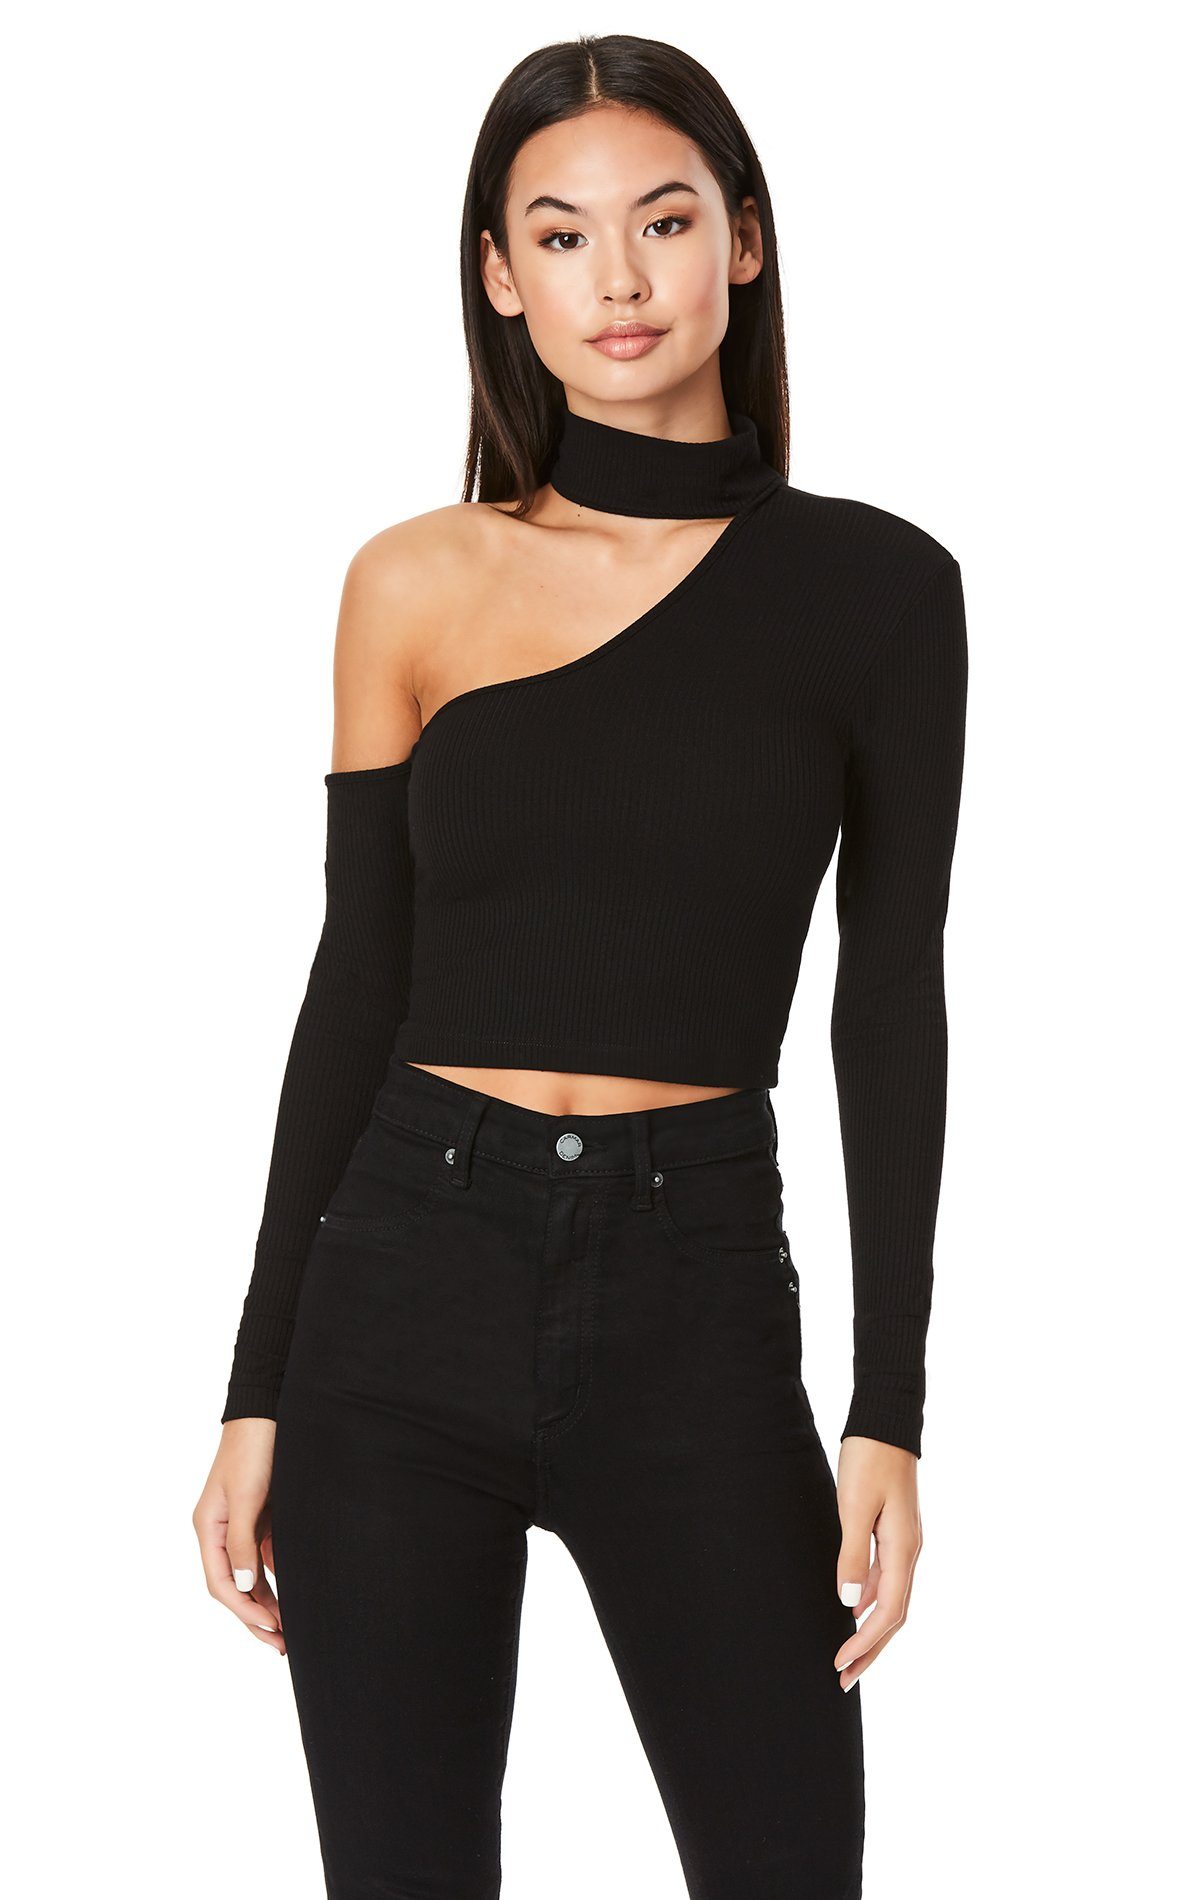 EXTREME CUT OUT TURTLENECK